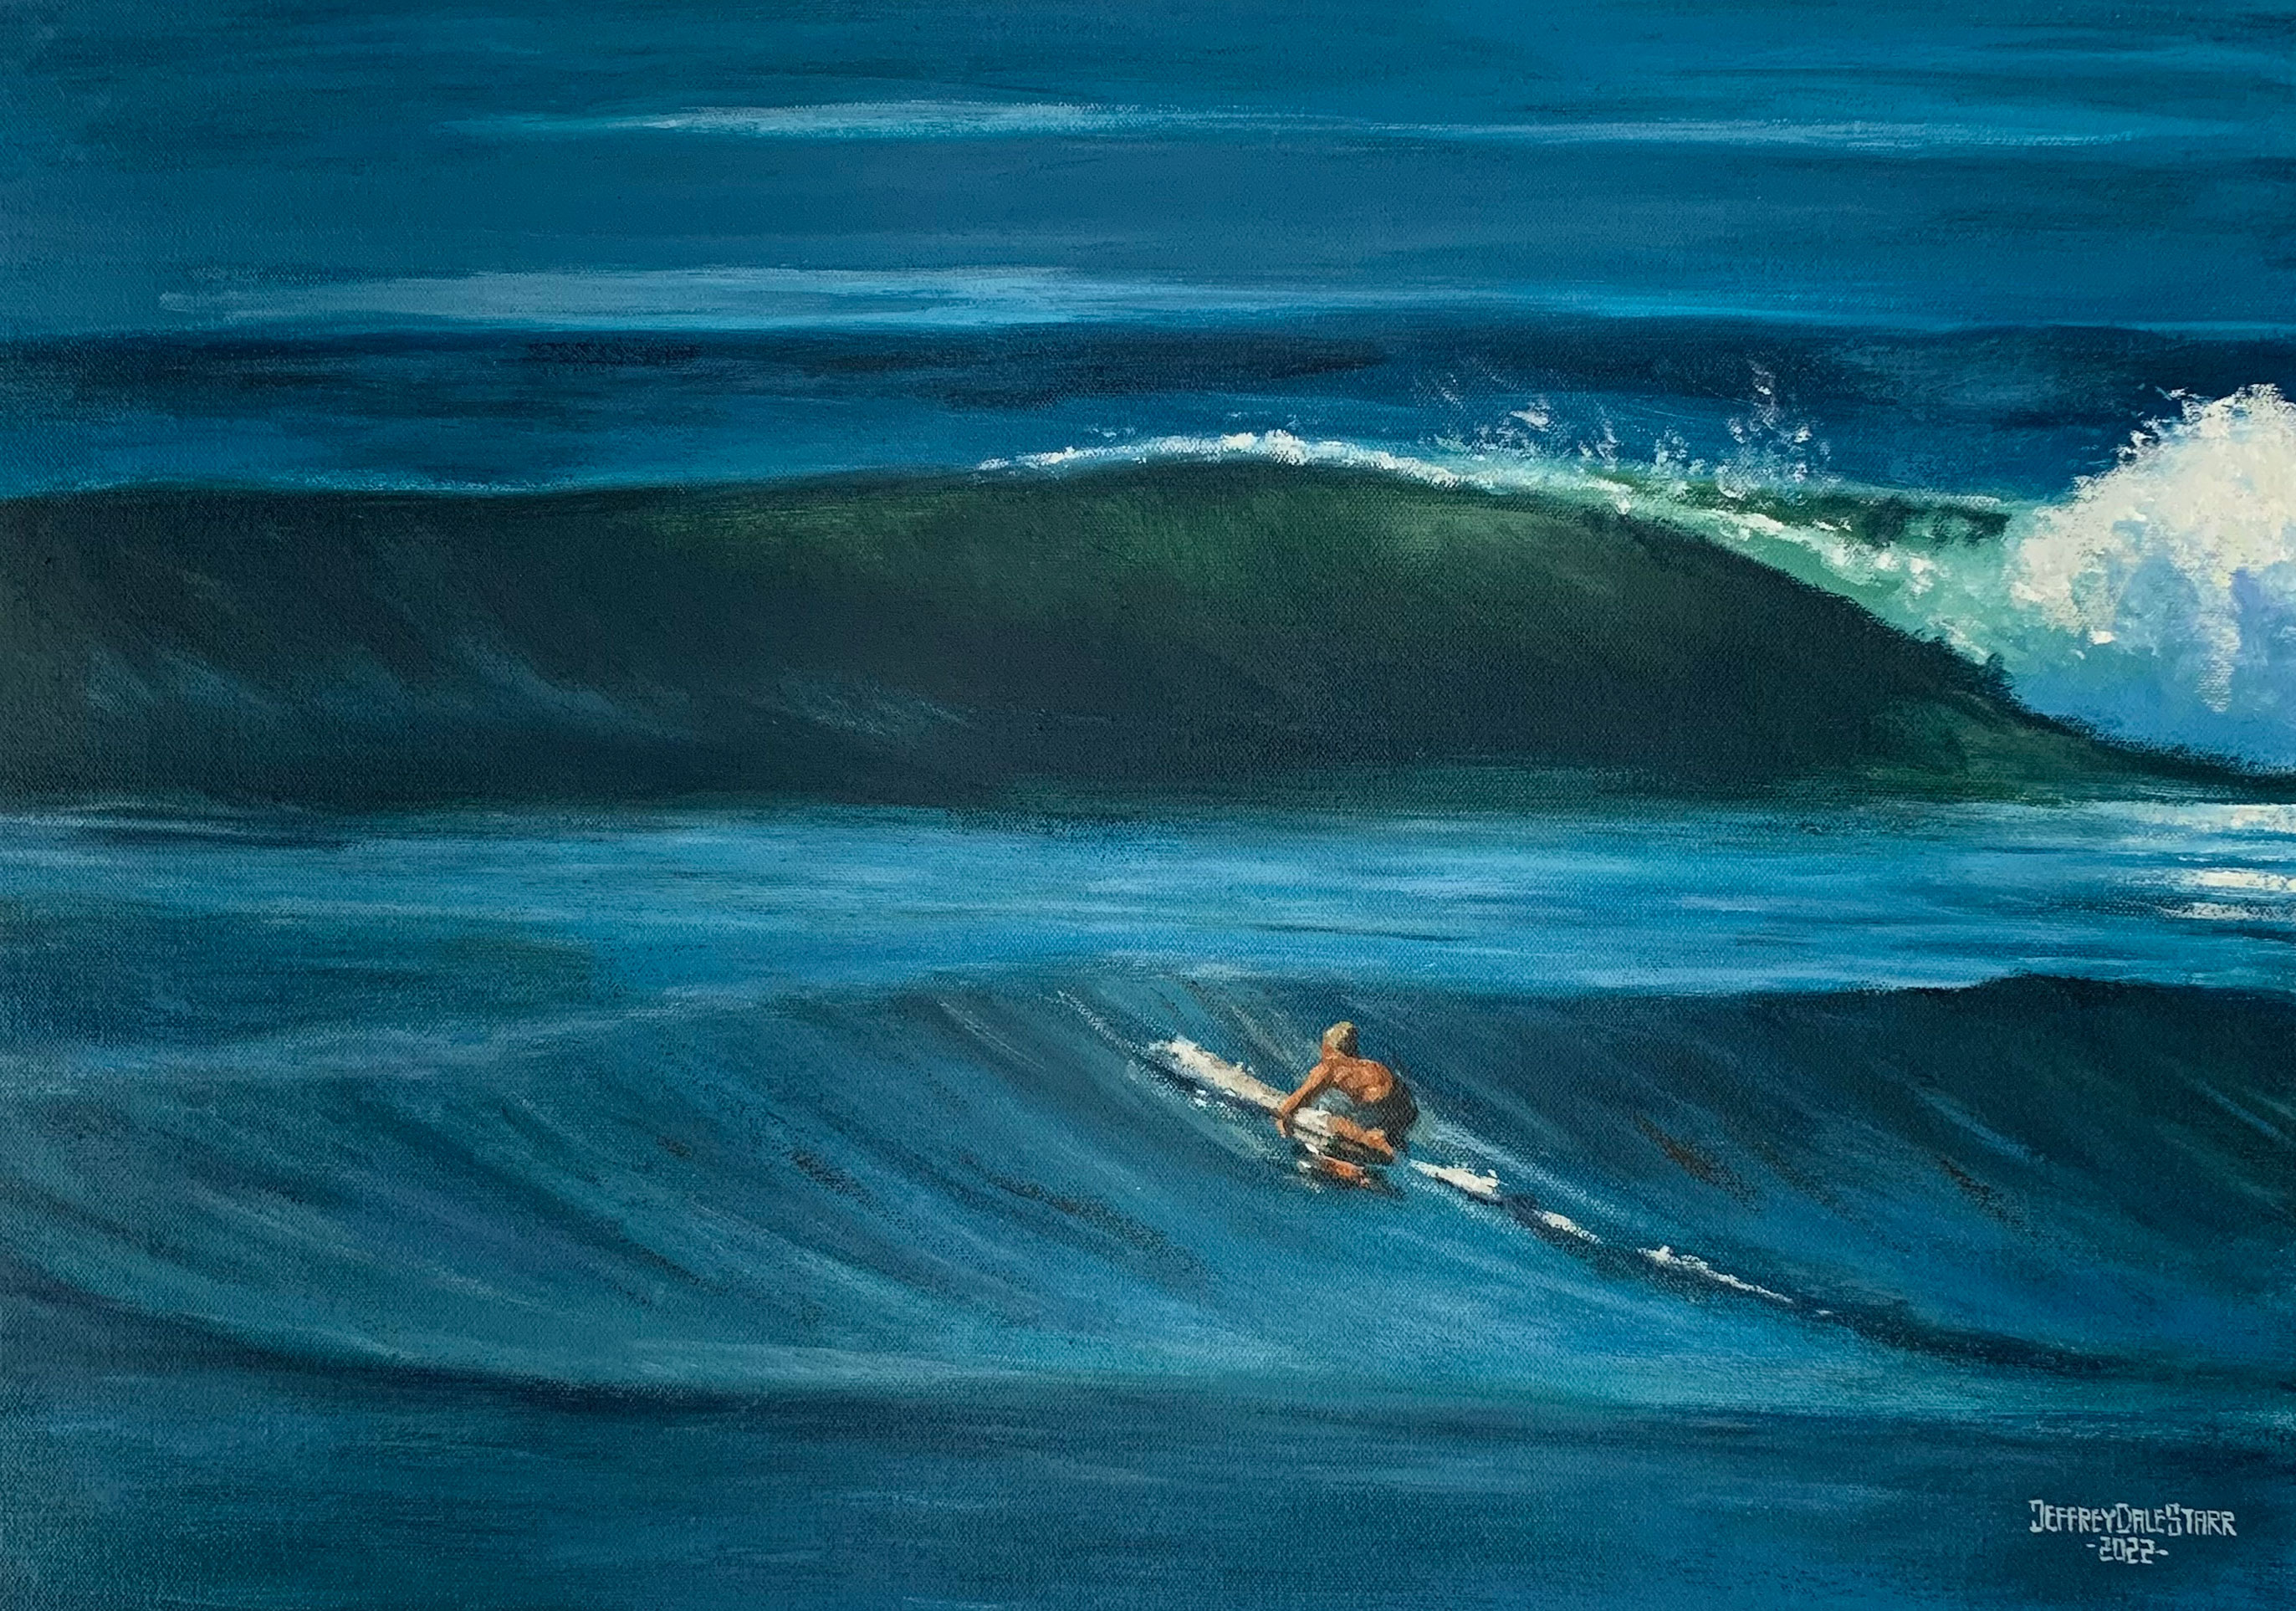 Oil painting "The Surfer" by Jeffrey Dale Starr